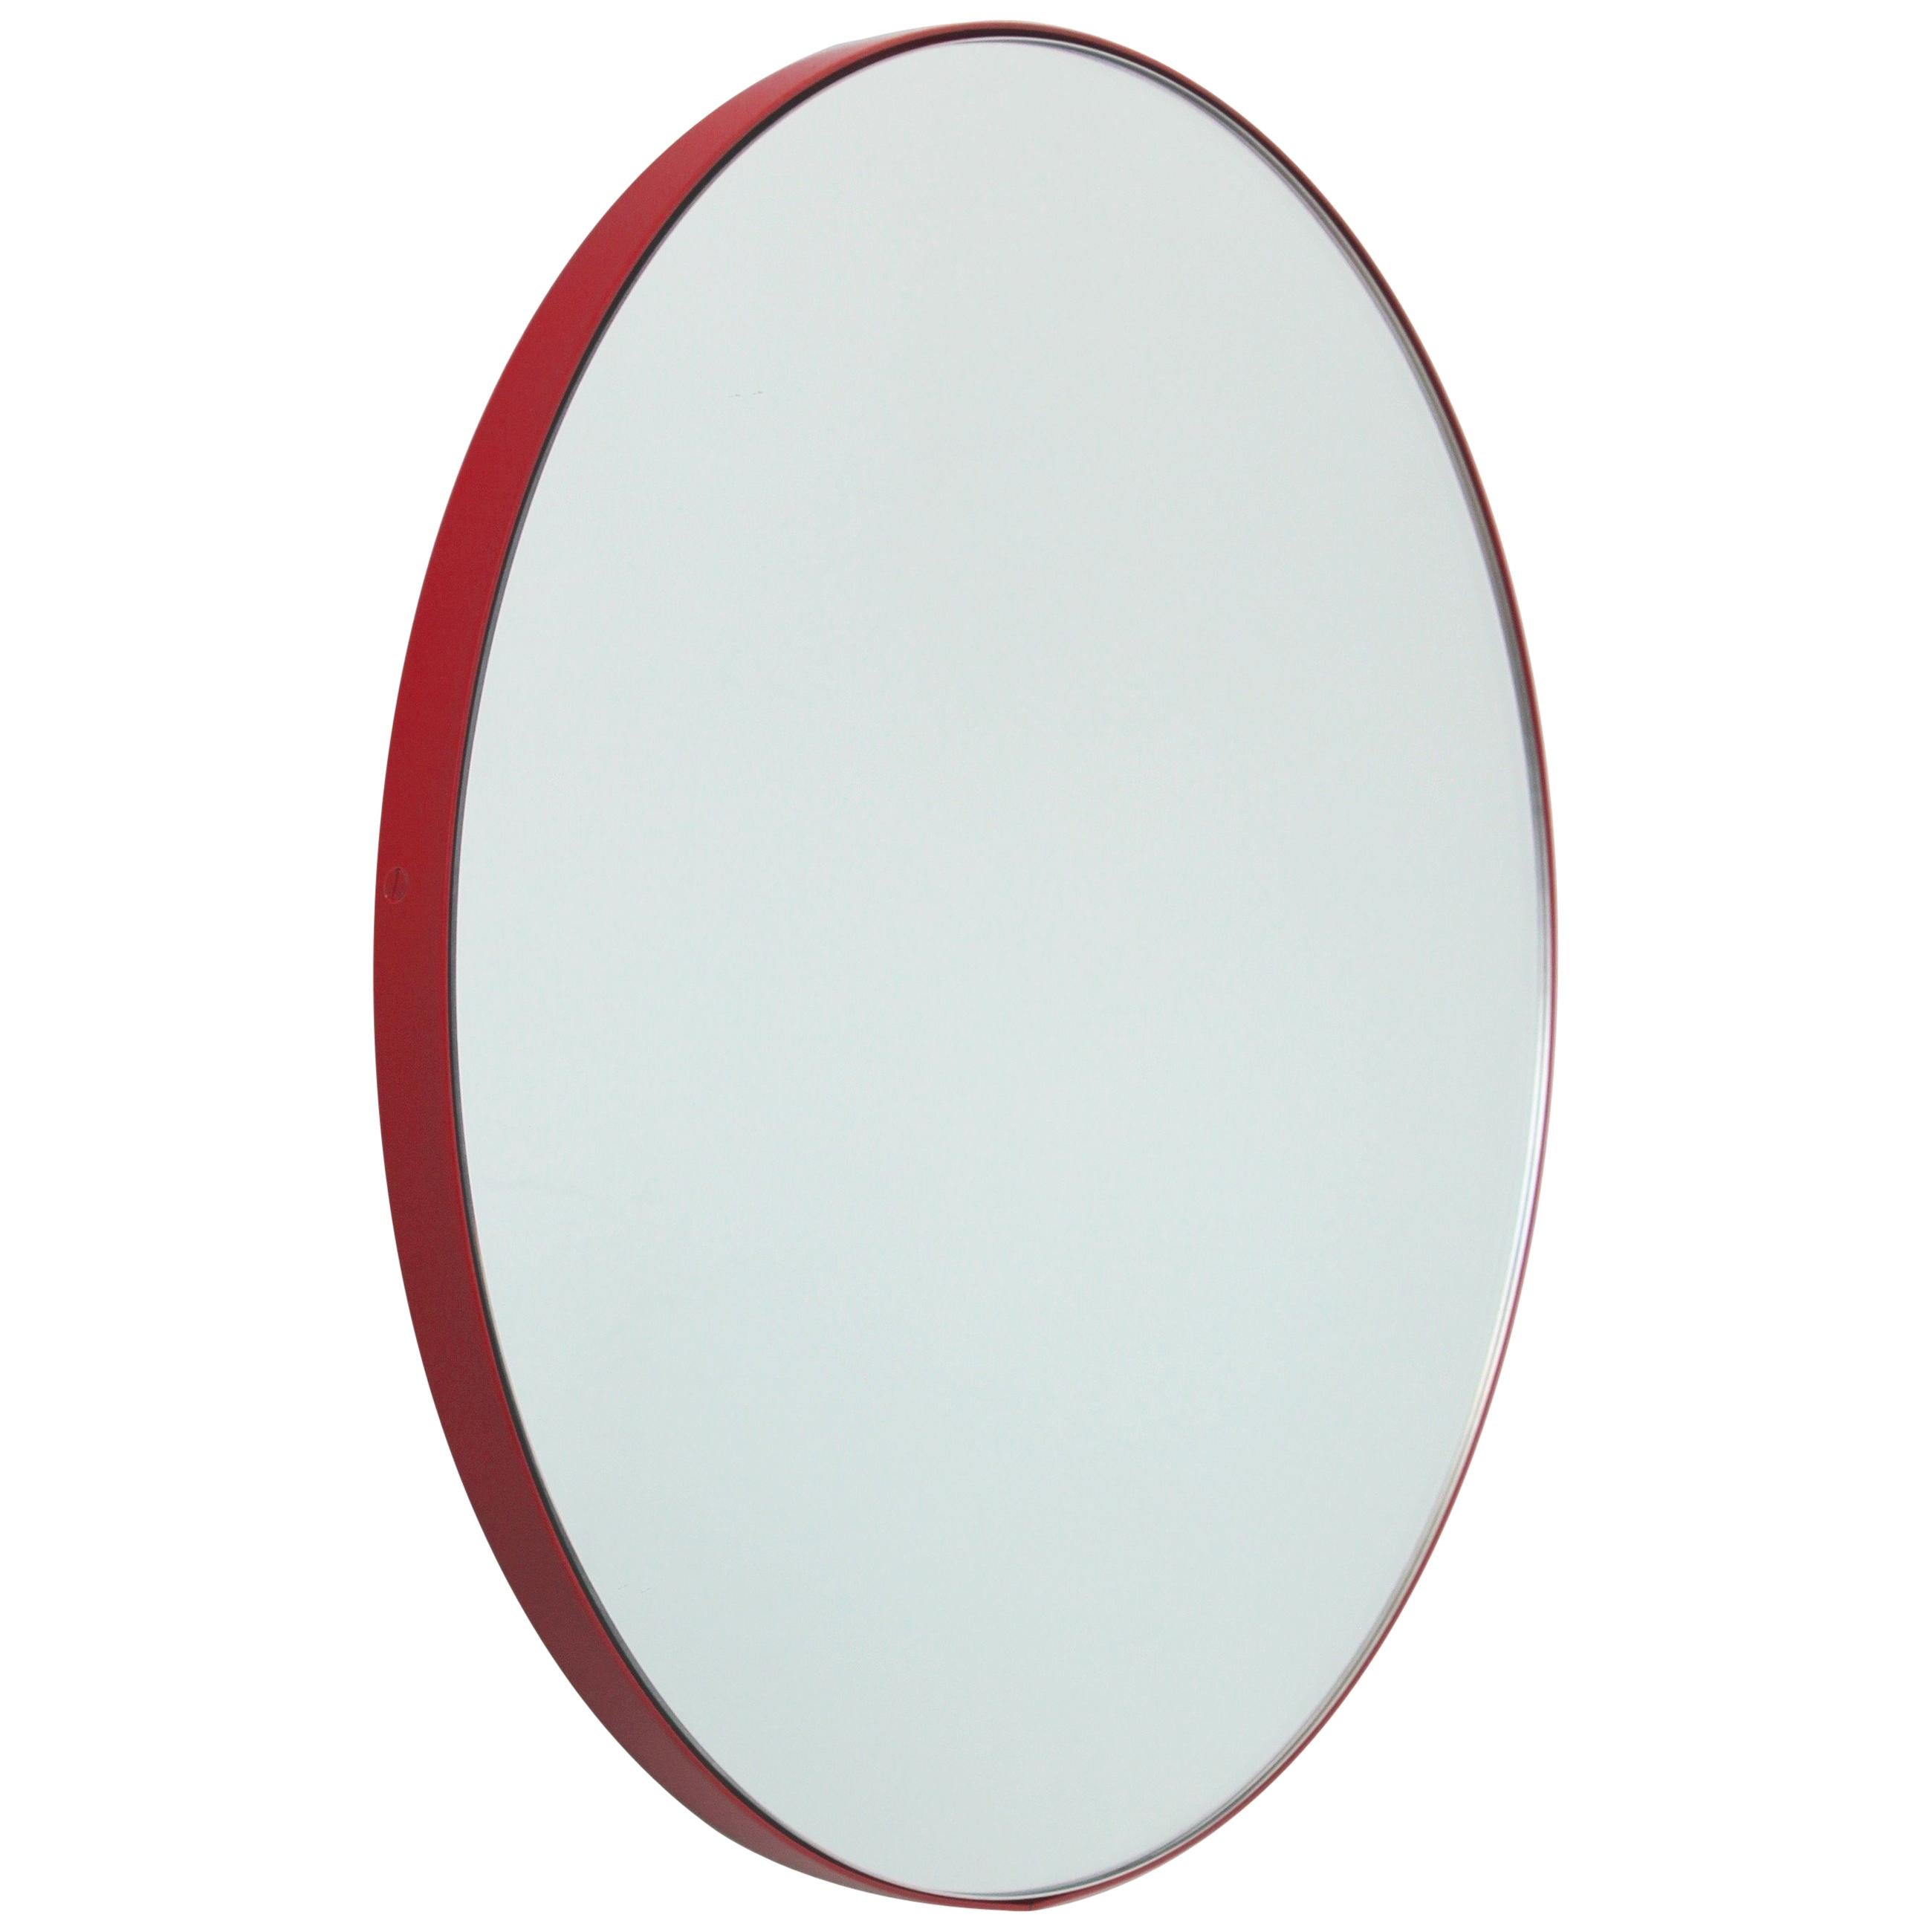 Orbis Round Contemporary Mirror with Red Frame, Customisable - Regular